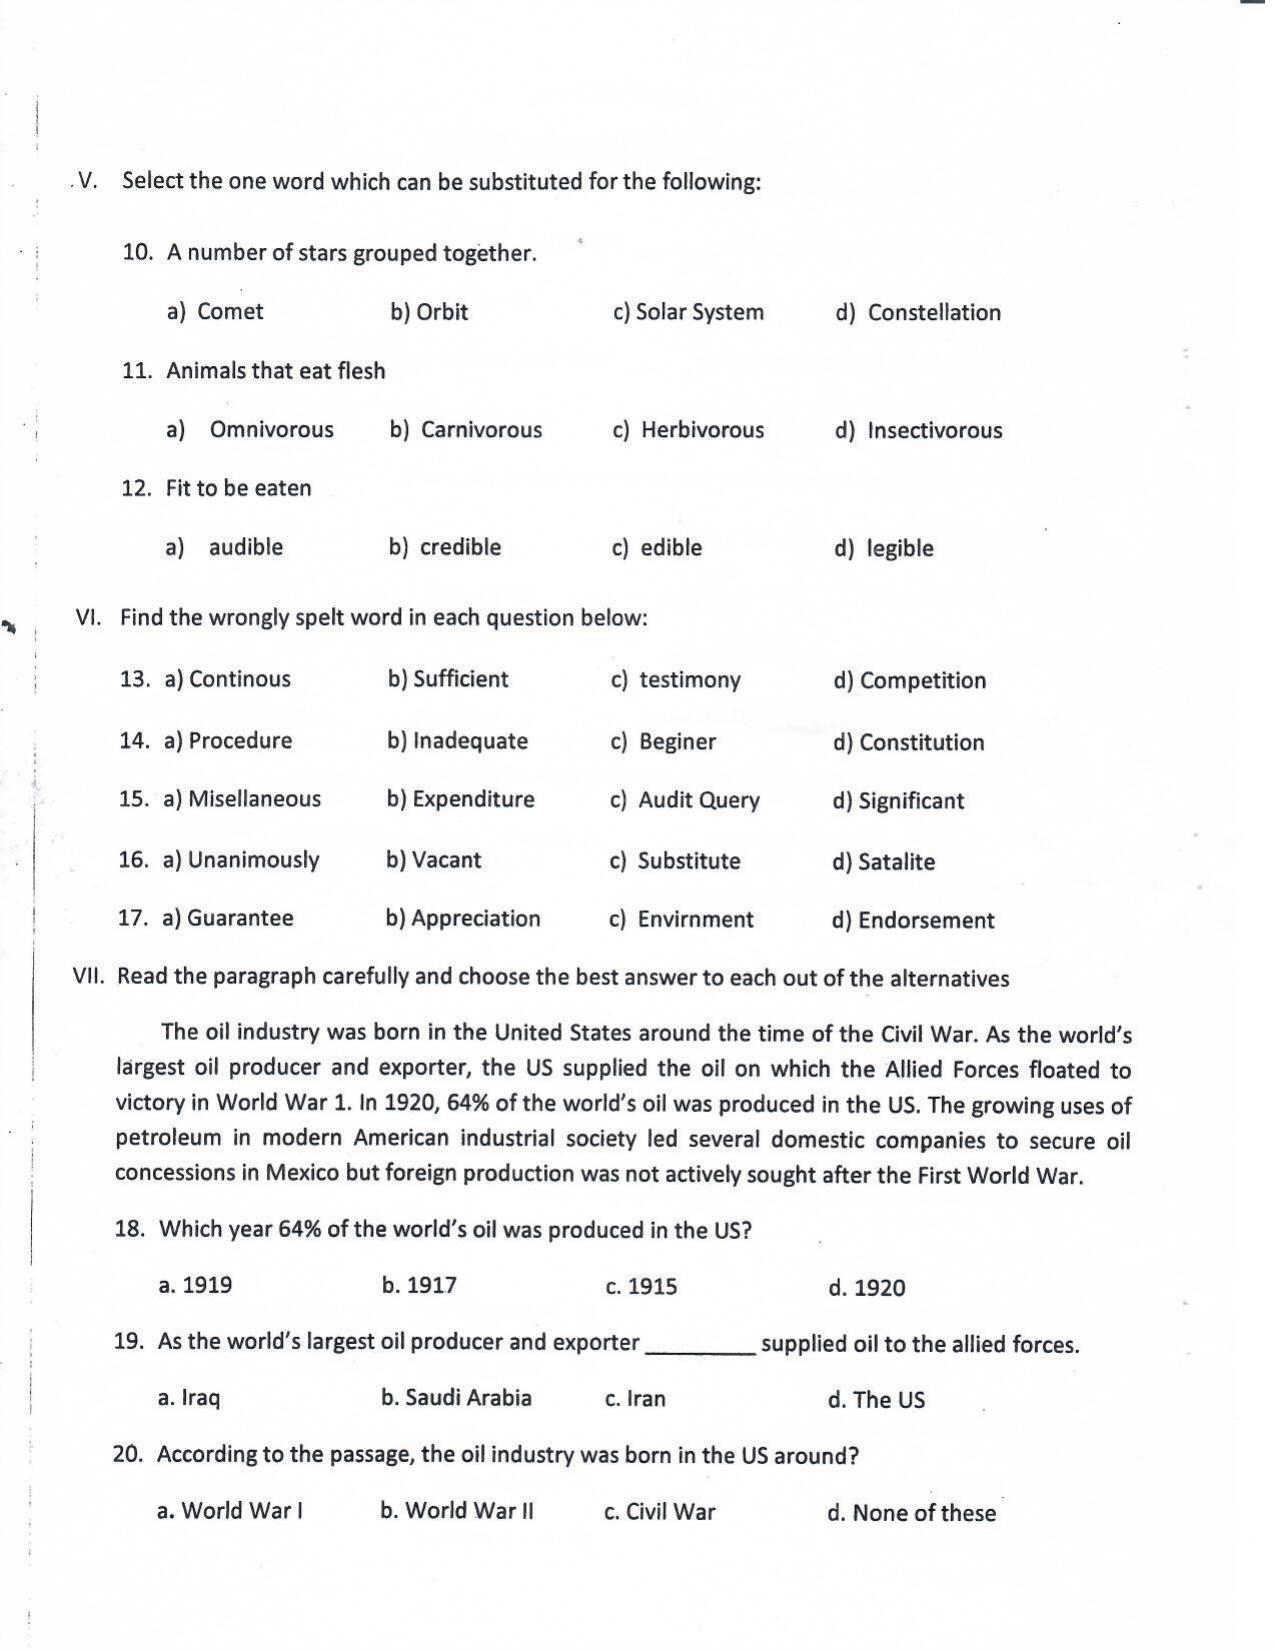 LPSC Hindi Typist 2020 Question Paper - Page 3